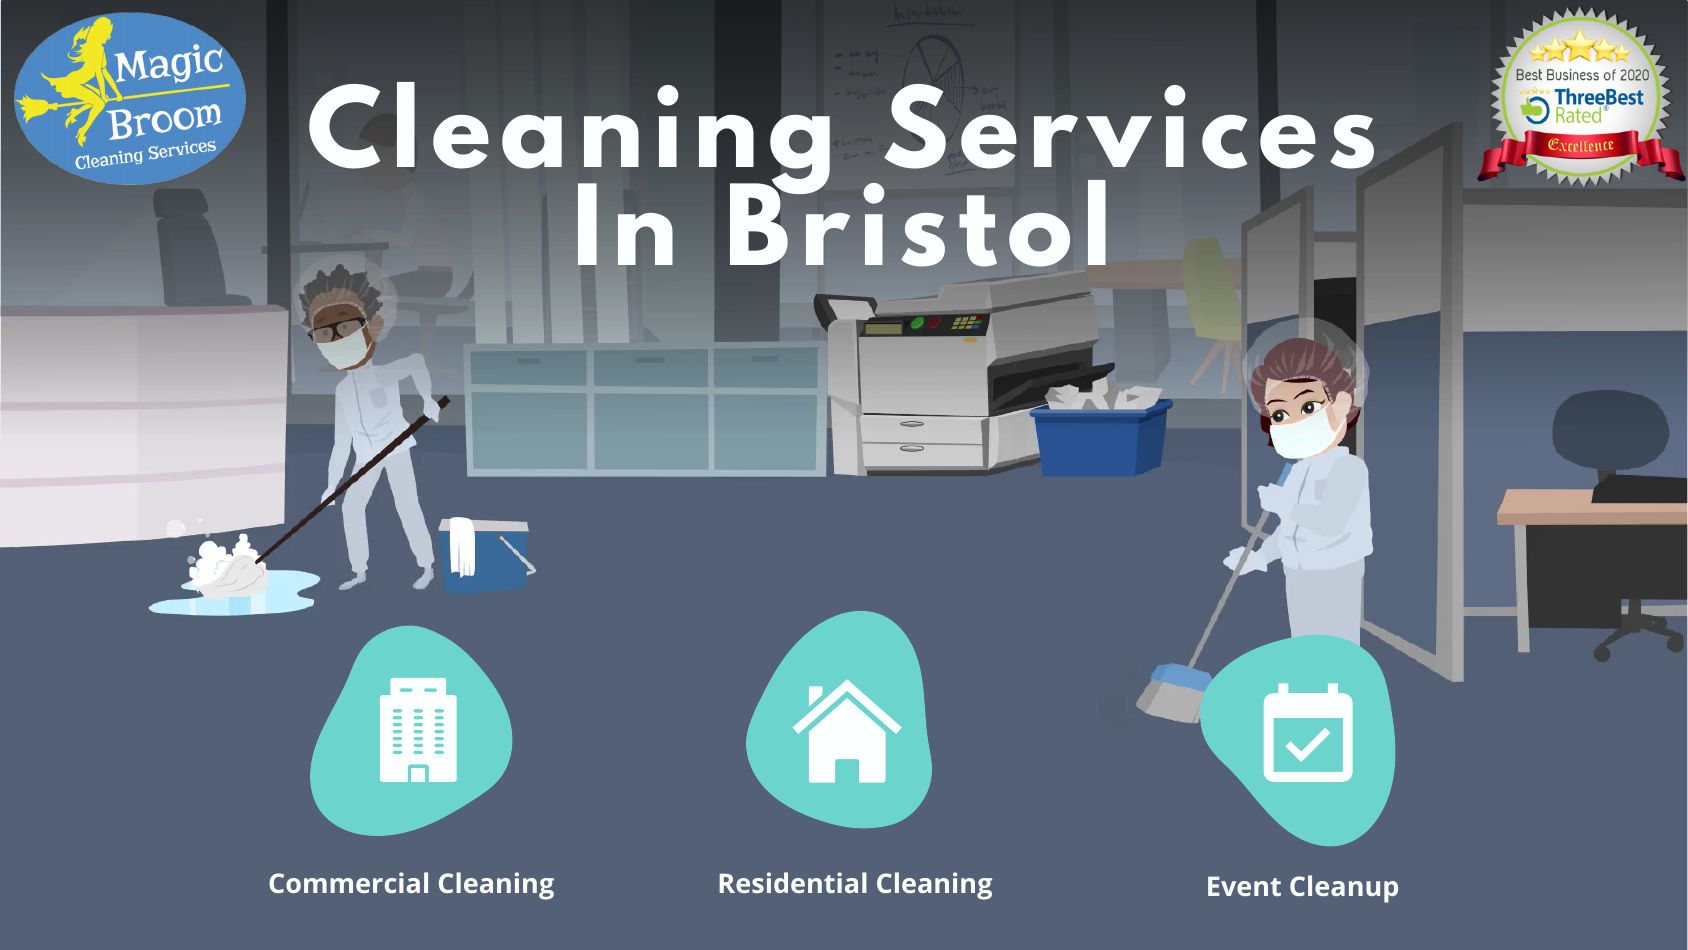 Main image for Magic Broom Office Cleaning Services Bristol